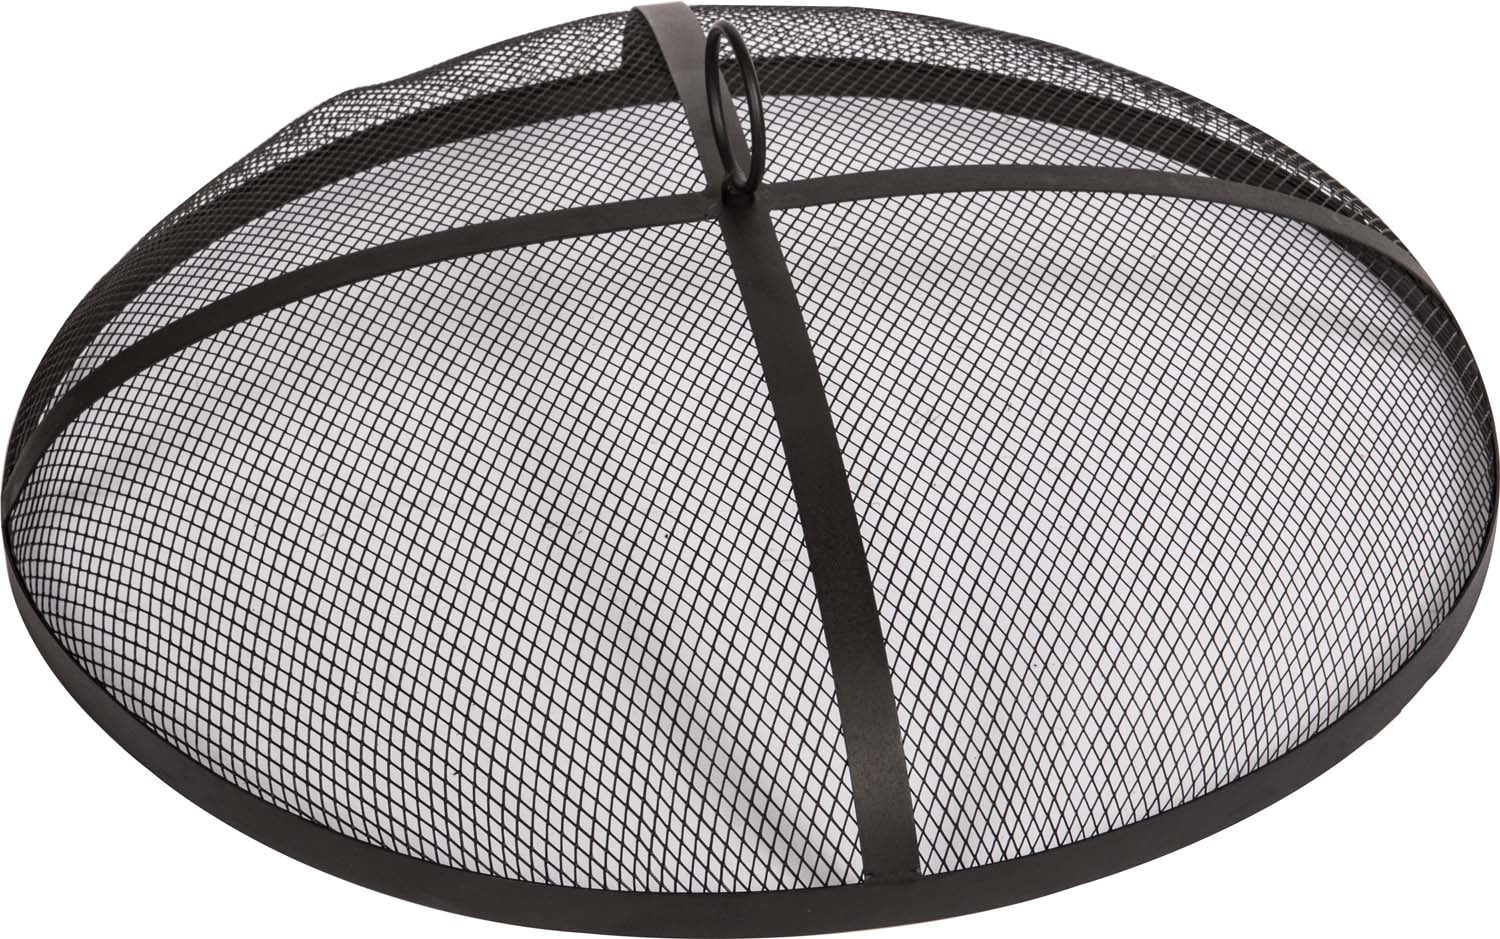 Sunnydaze Easy Opening Fire Pit Spark, 40 Fire Pit Spark Screen